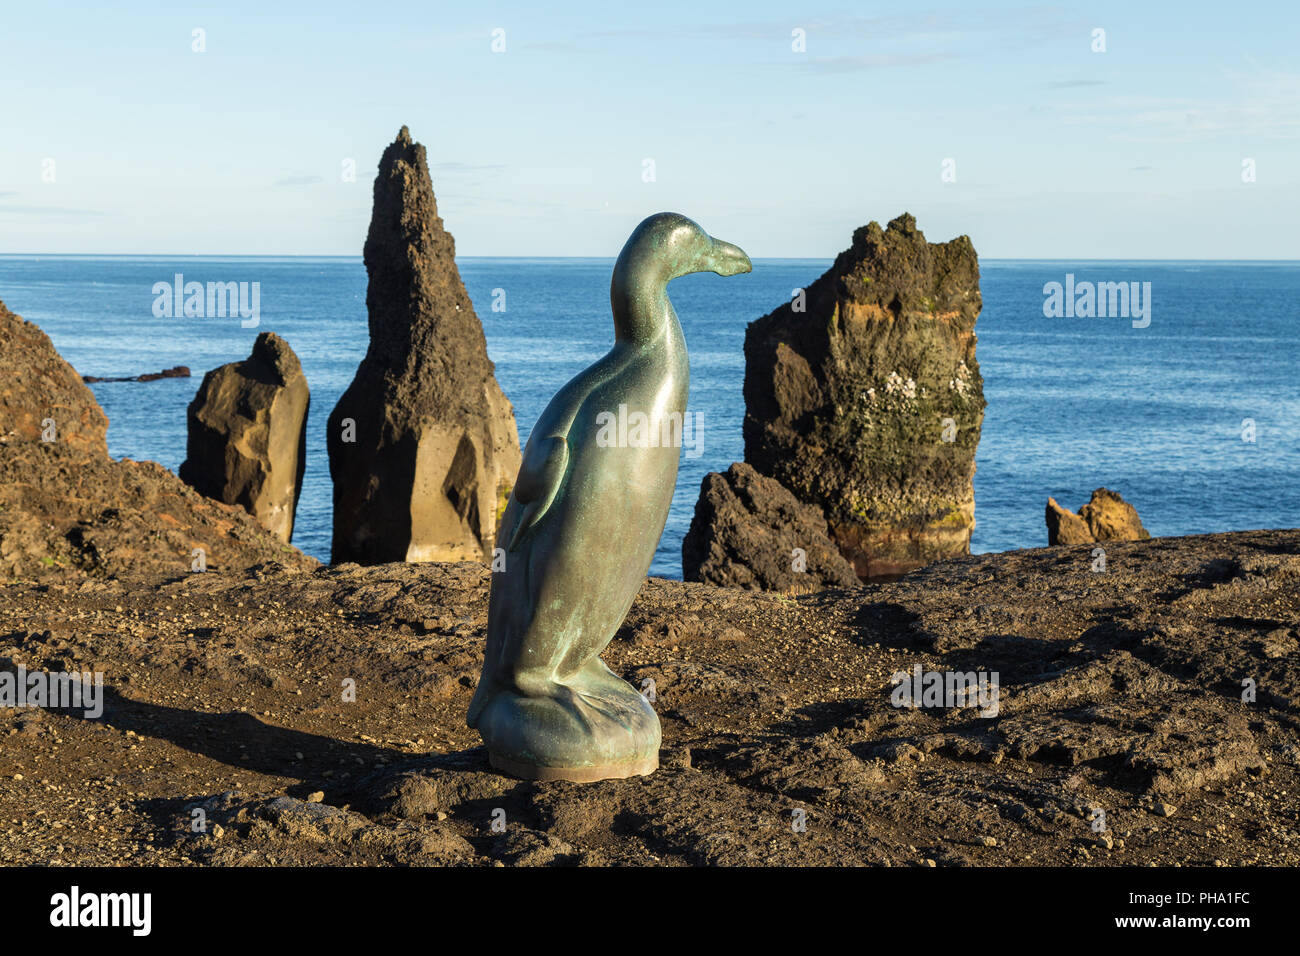 Pinguinus impennis at the southern part of Iceland Stock Photo